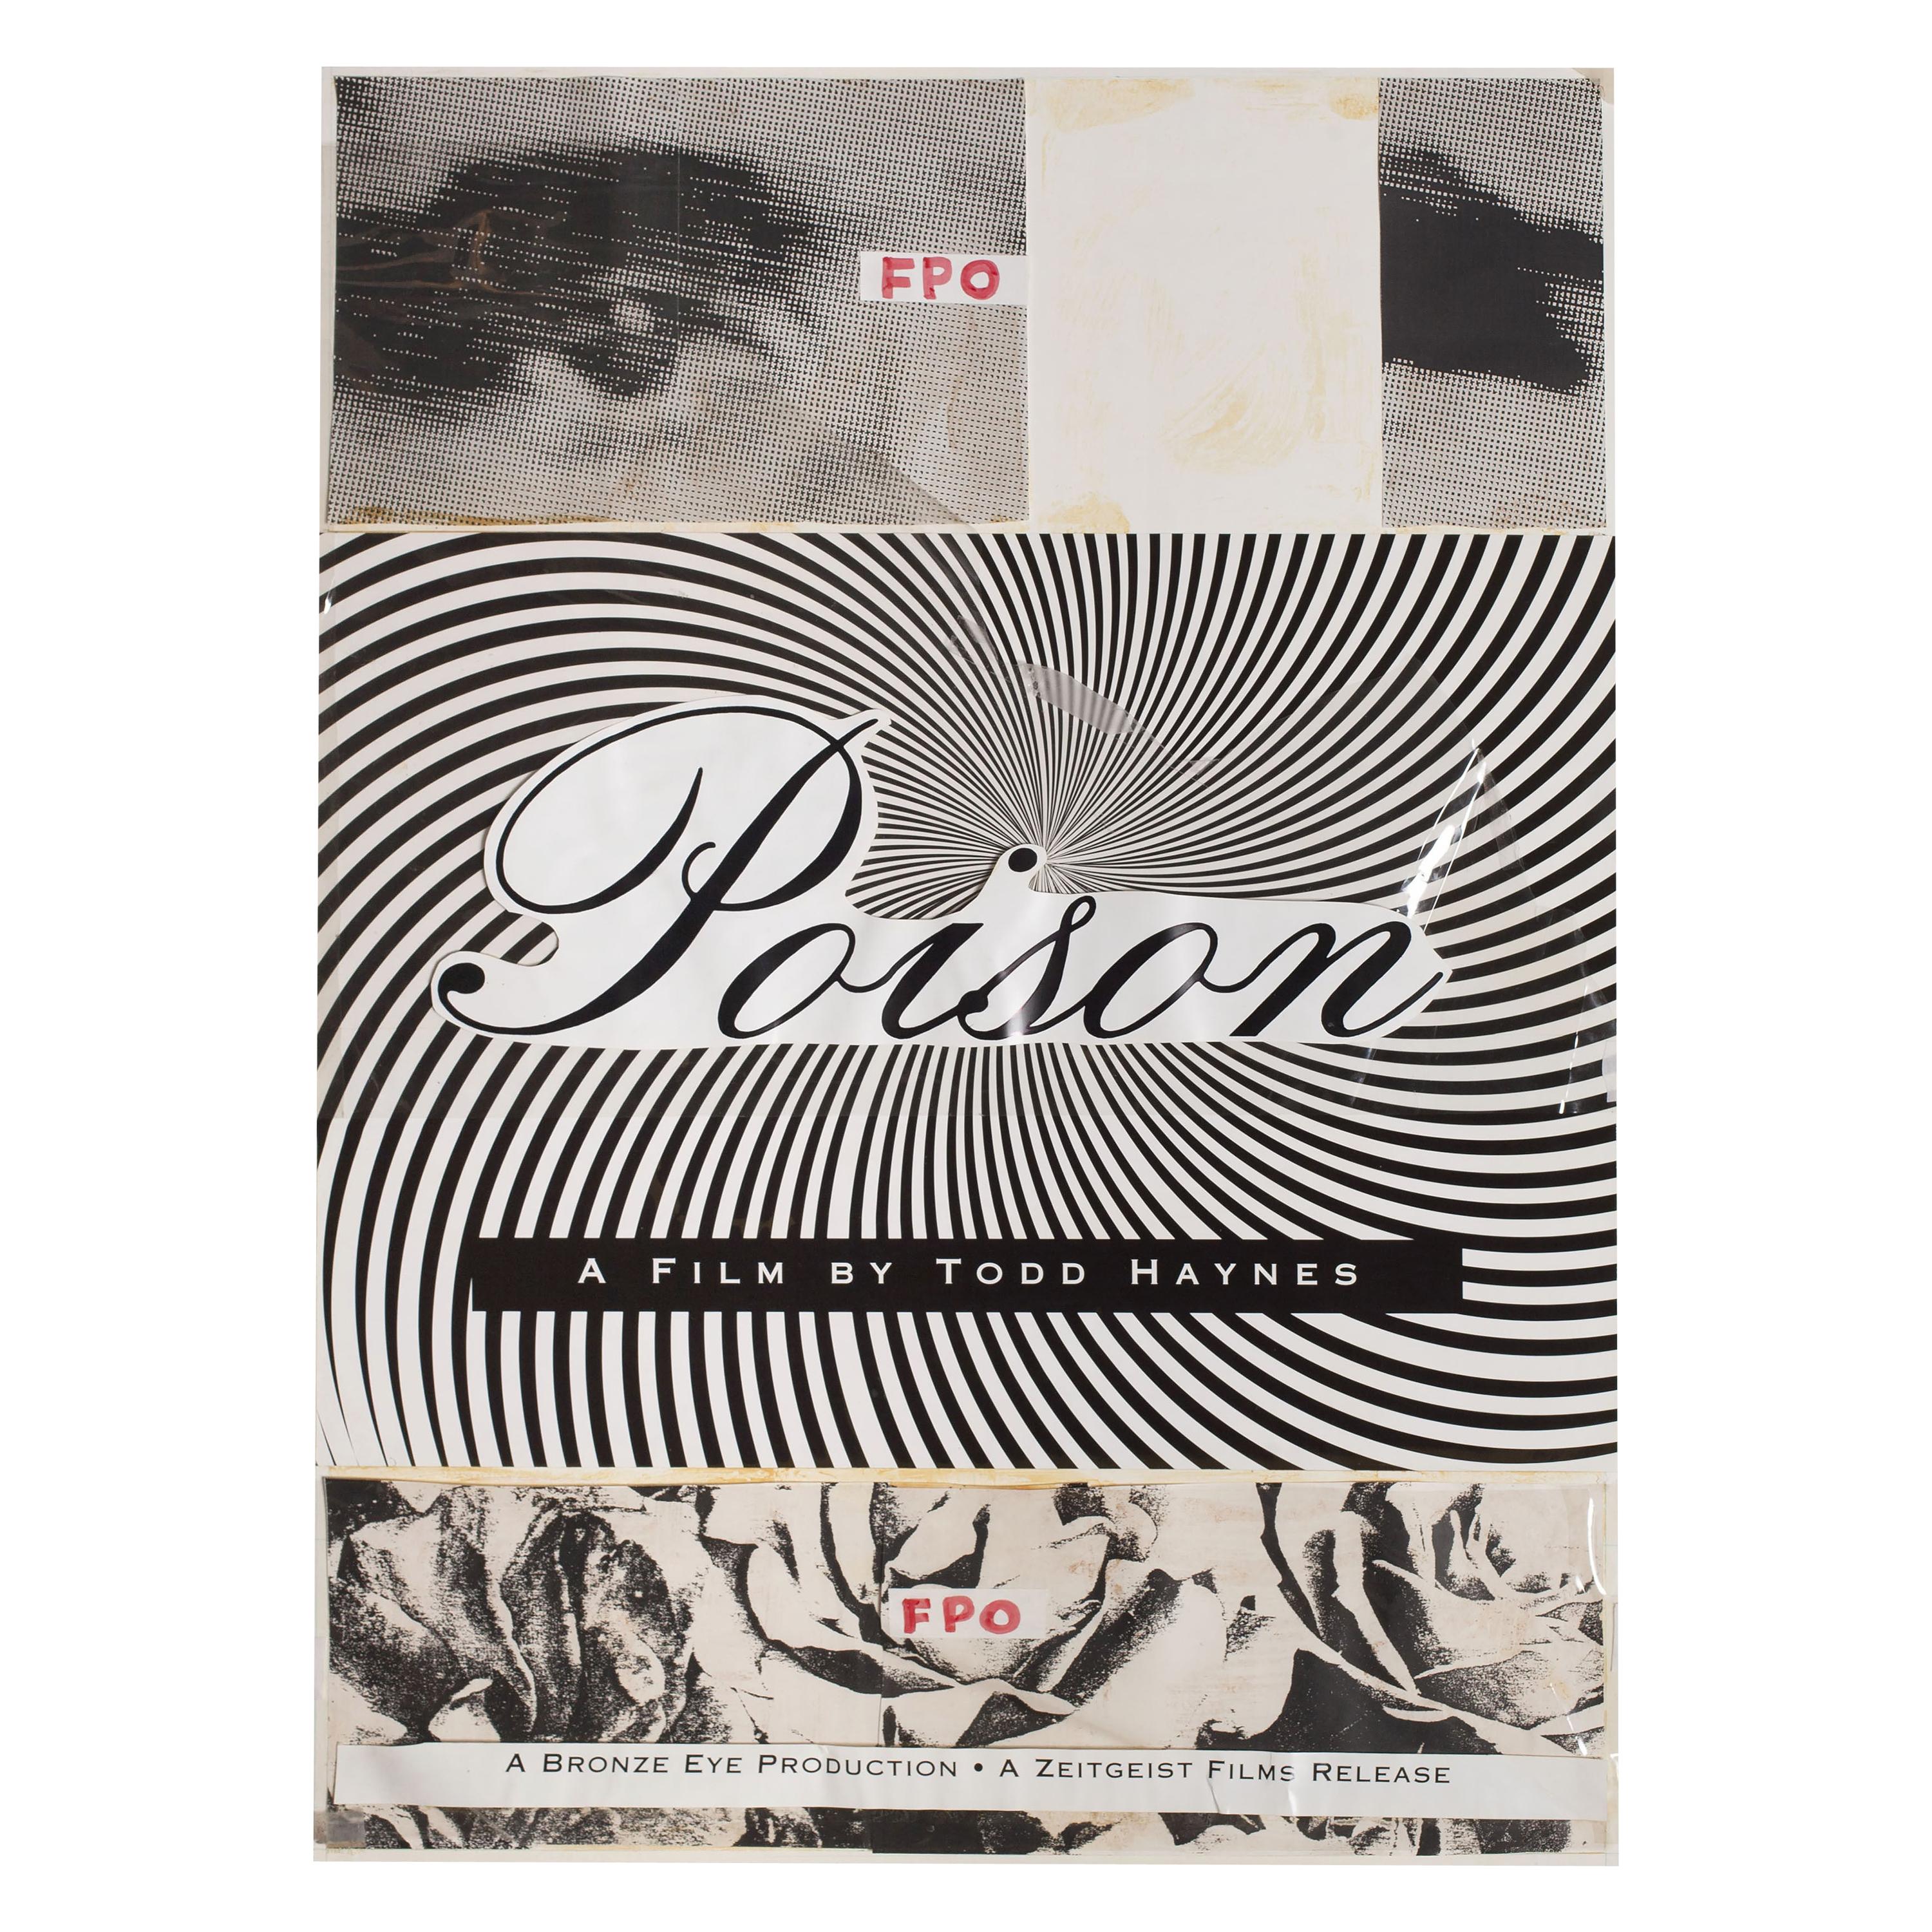 Poison 1991 One Sheet and Original Artwork by Todd Haynes For Sale